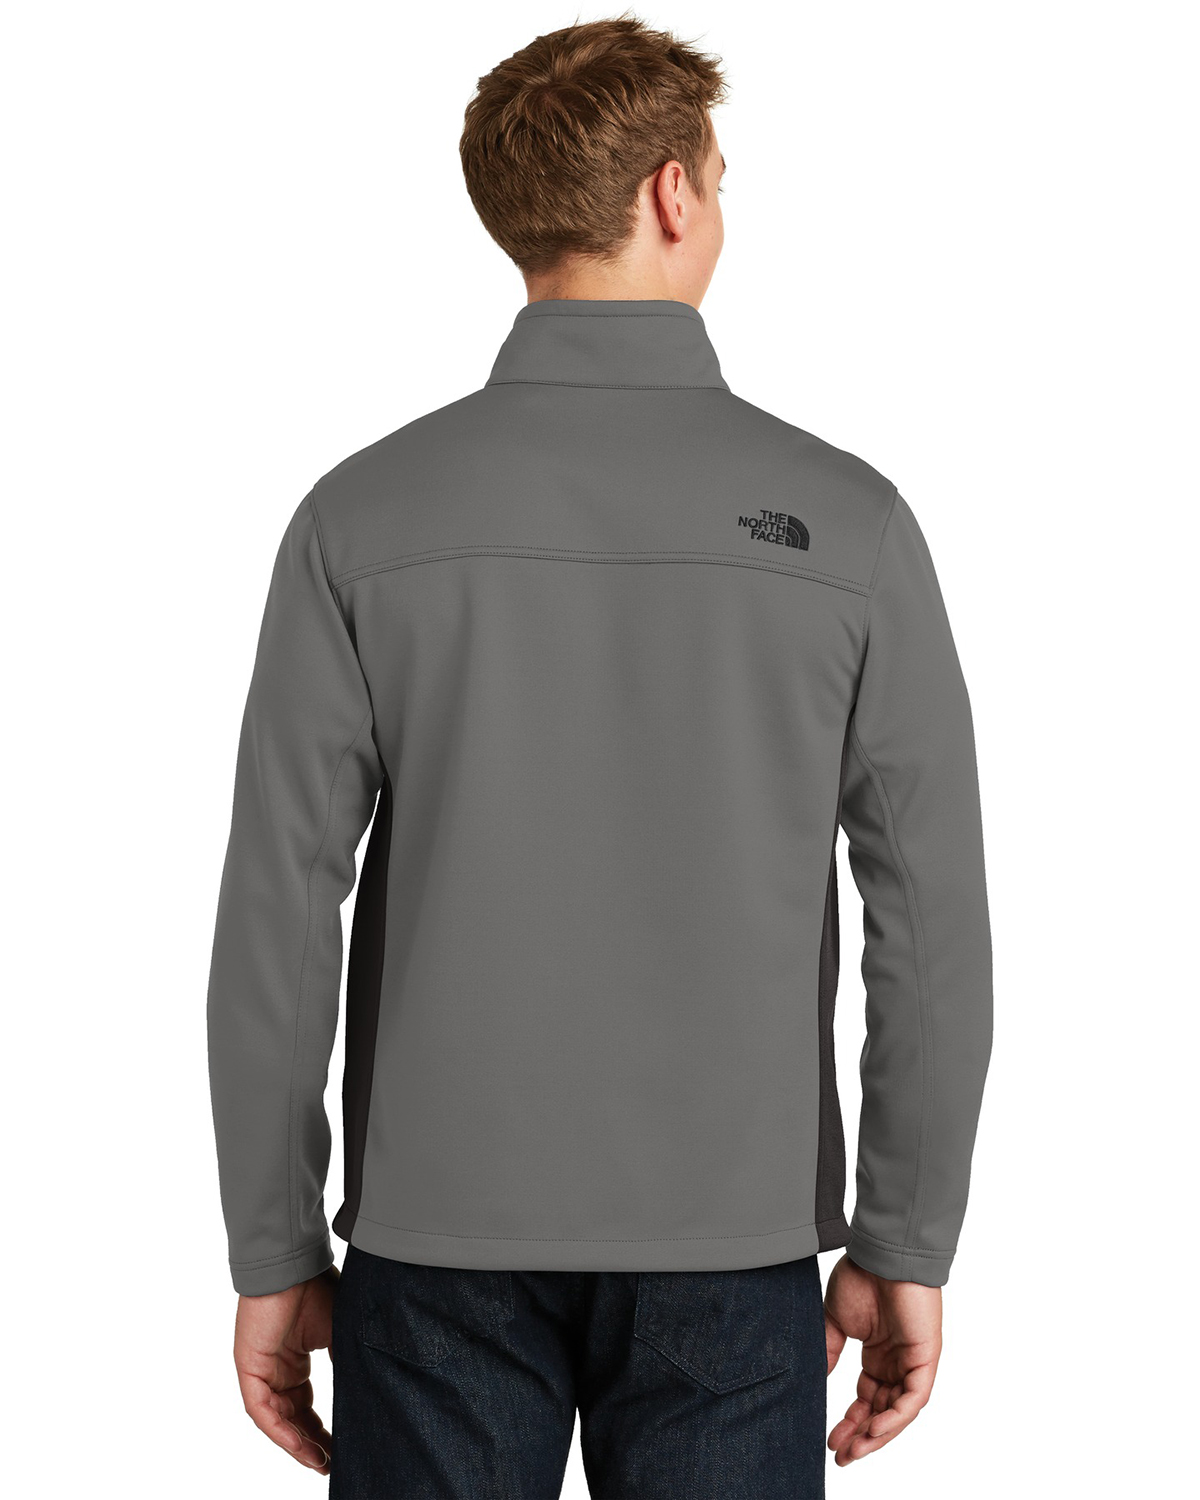 'The North Face NF0A3LGX Ridgeline Soft Shell Jacket'